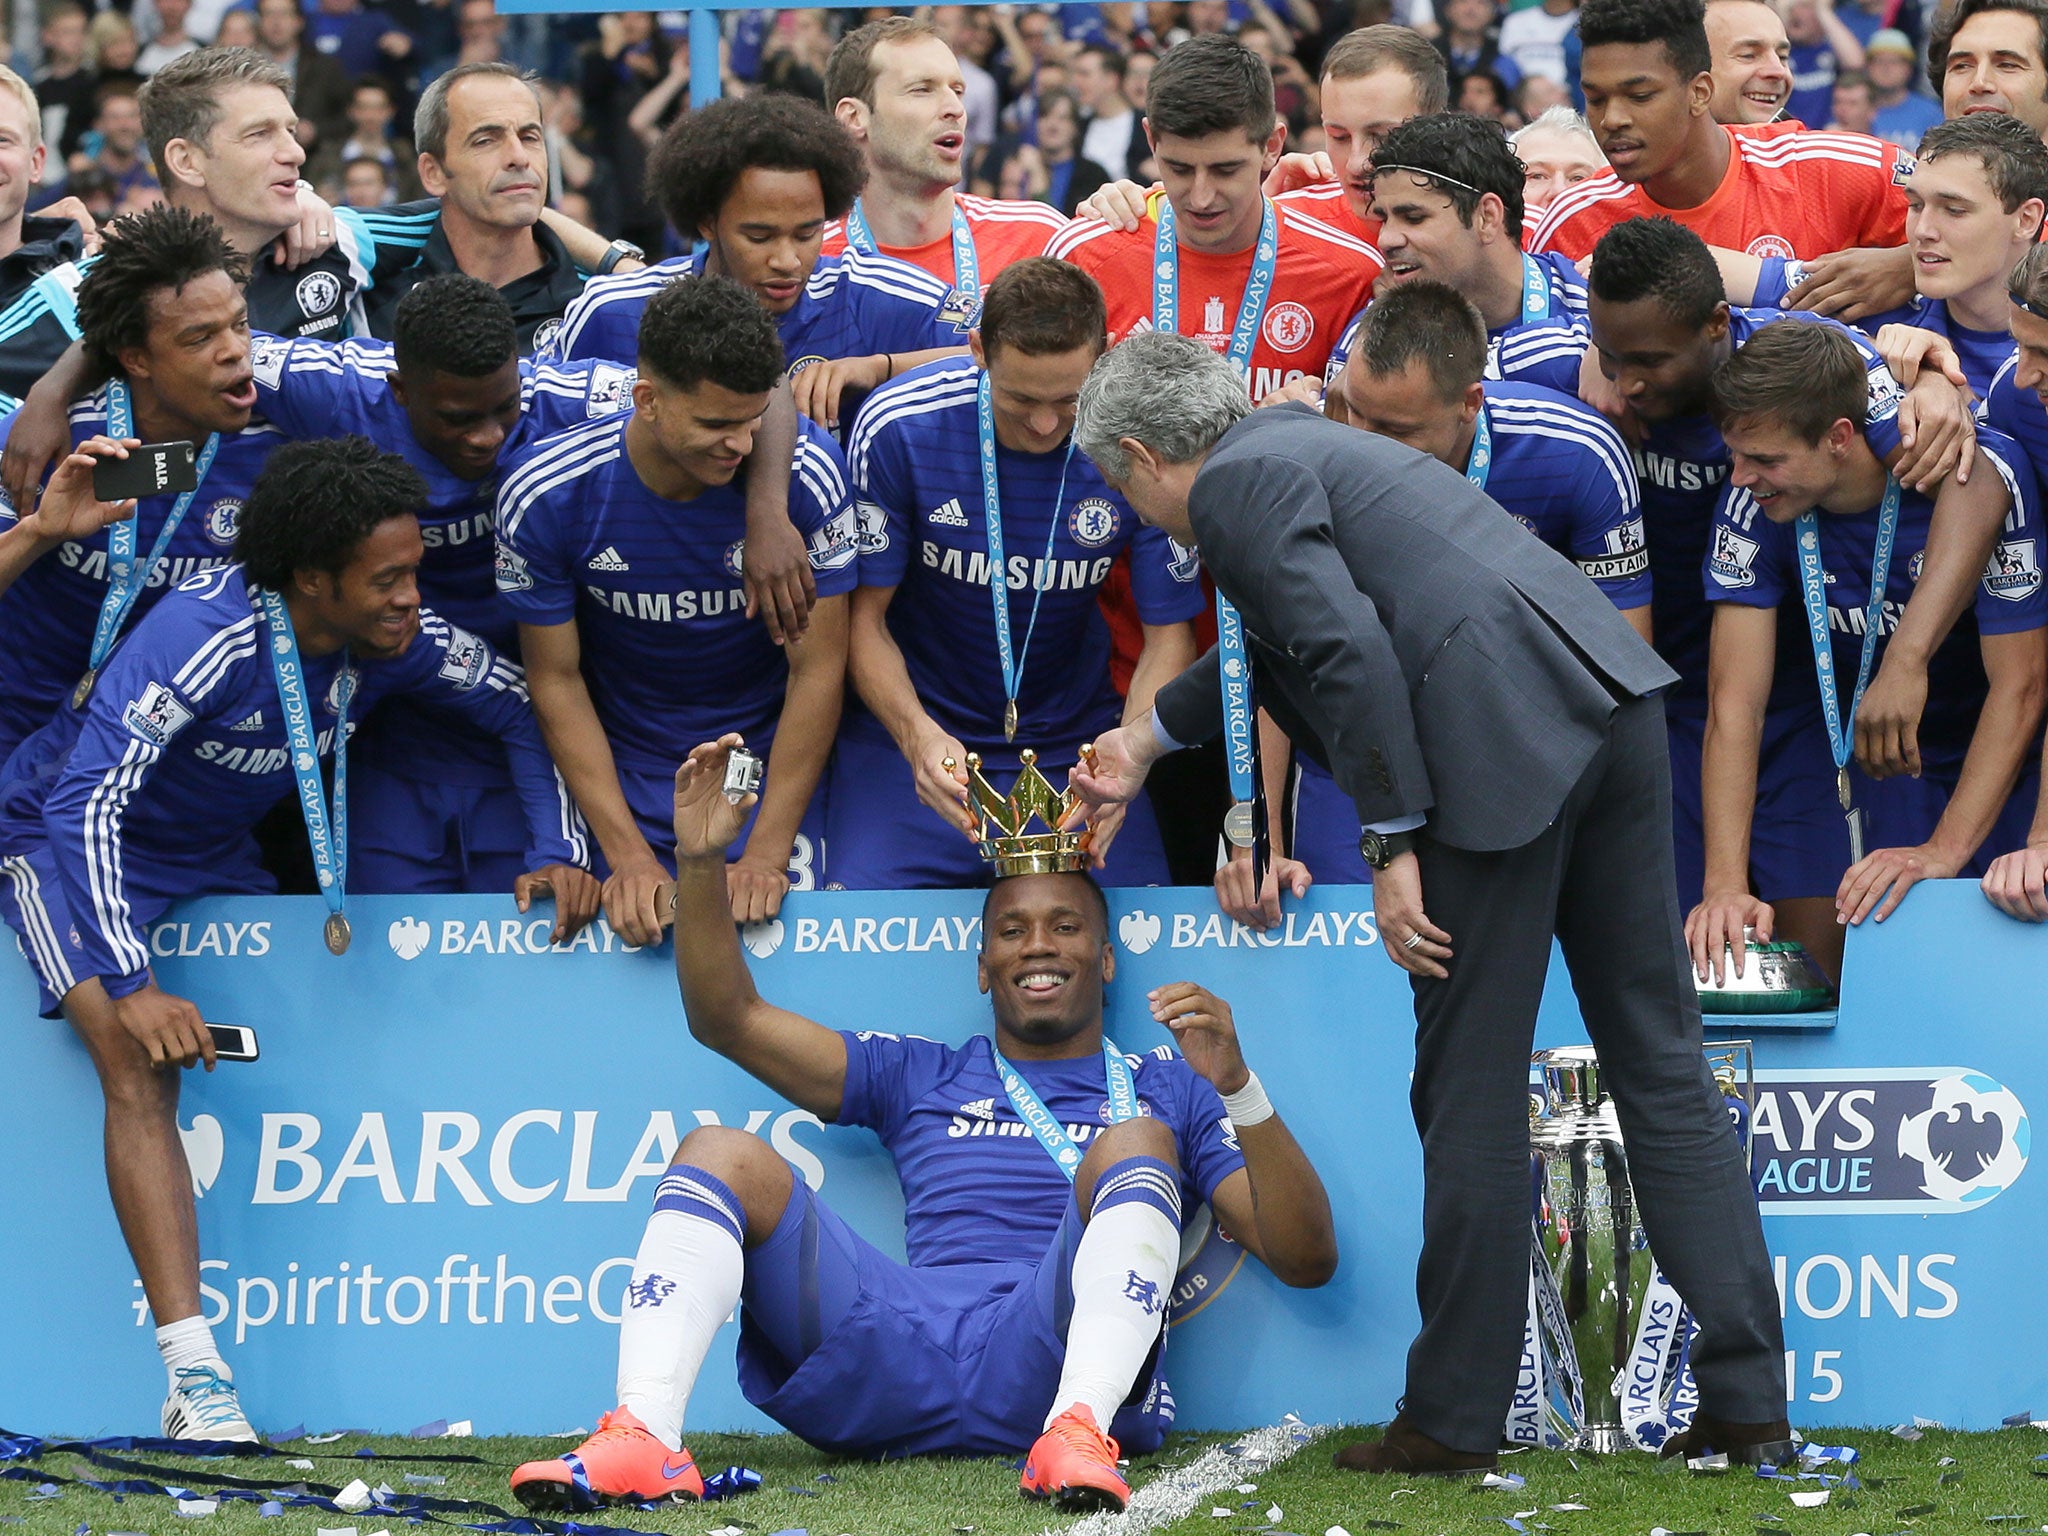 Chelsea players celebrate with the trophy after the English Premier League soccer match between Chelsea and Sunderland at Stamford Bridge stadium in London. Chelsea were awarded the trophy after winning the English Premier League 